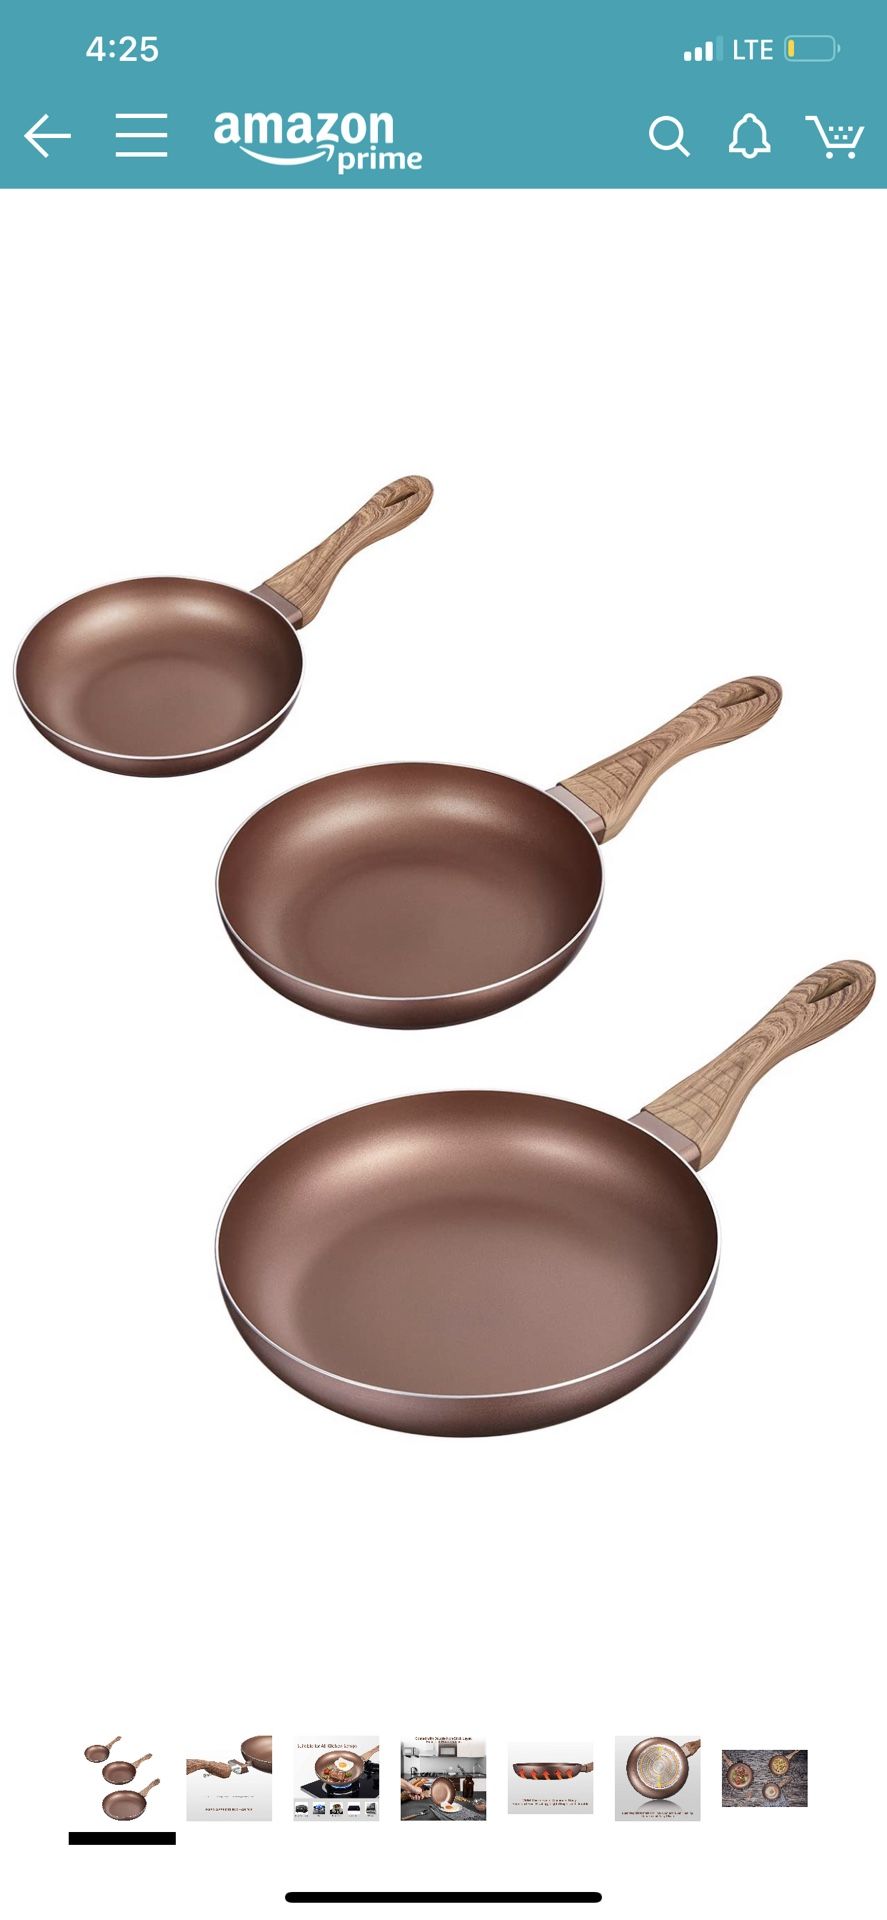 Brewsly Kitchen Nonstick Frying Pan Set, Induction Omelette Fry Pan Set 8” 9.5” and 11”, Hard Anodized Coating PFOA Free, Dishwasher Safe